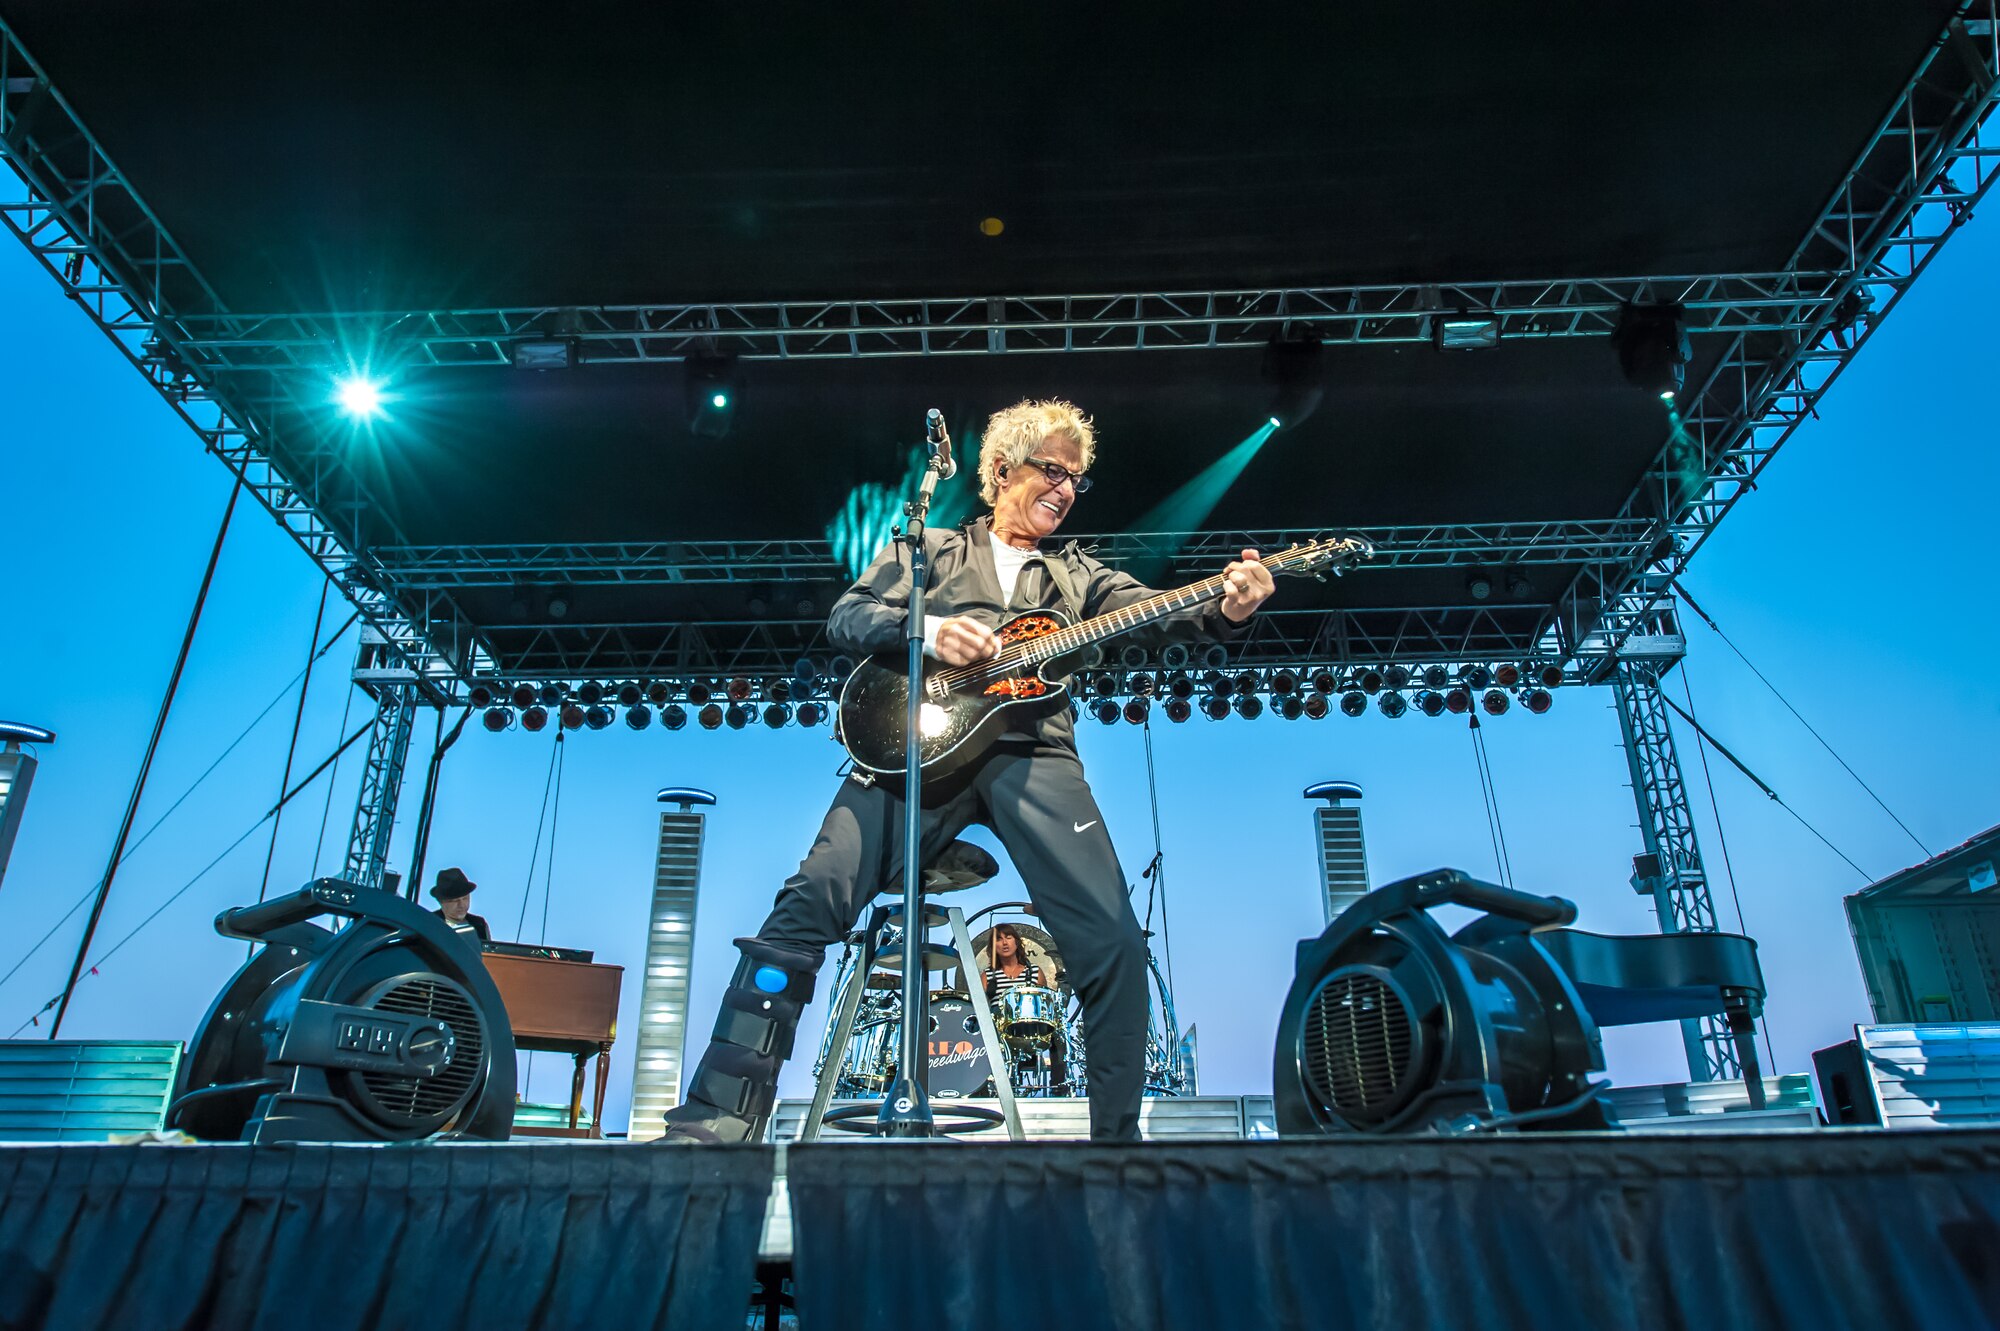 Kevin Cronin, the REO Speedwagon lead vocalist and rhythm guitarist, jams out on his guitar to the Spokane community including America's veterans during a Grandstand performance at the Spokane Interstate Fair in Spokane, Washington, Sept. 11, 2014. REO Speedwagon thanked America’s veterans and families, both past and present, for their service and sacrifice in the name of freedom. Total force Airmen from around the globe took time to commemorate the 13th anniversary of Sept. 11, 2001, with everything from commemorative runs, to tributes and moments of silence. (U.S. Air Force photo by Staff Sgt. Benjamin W. Stratton/Released)